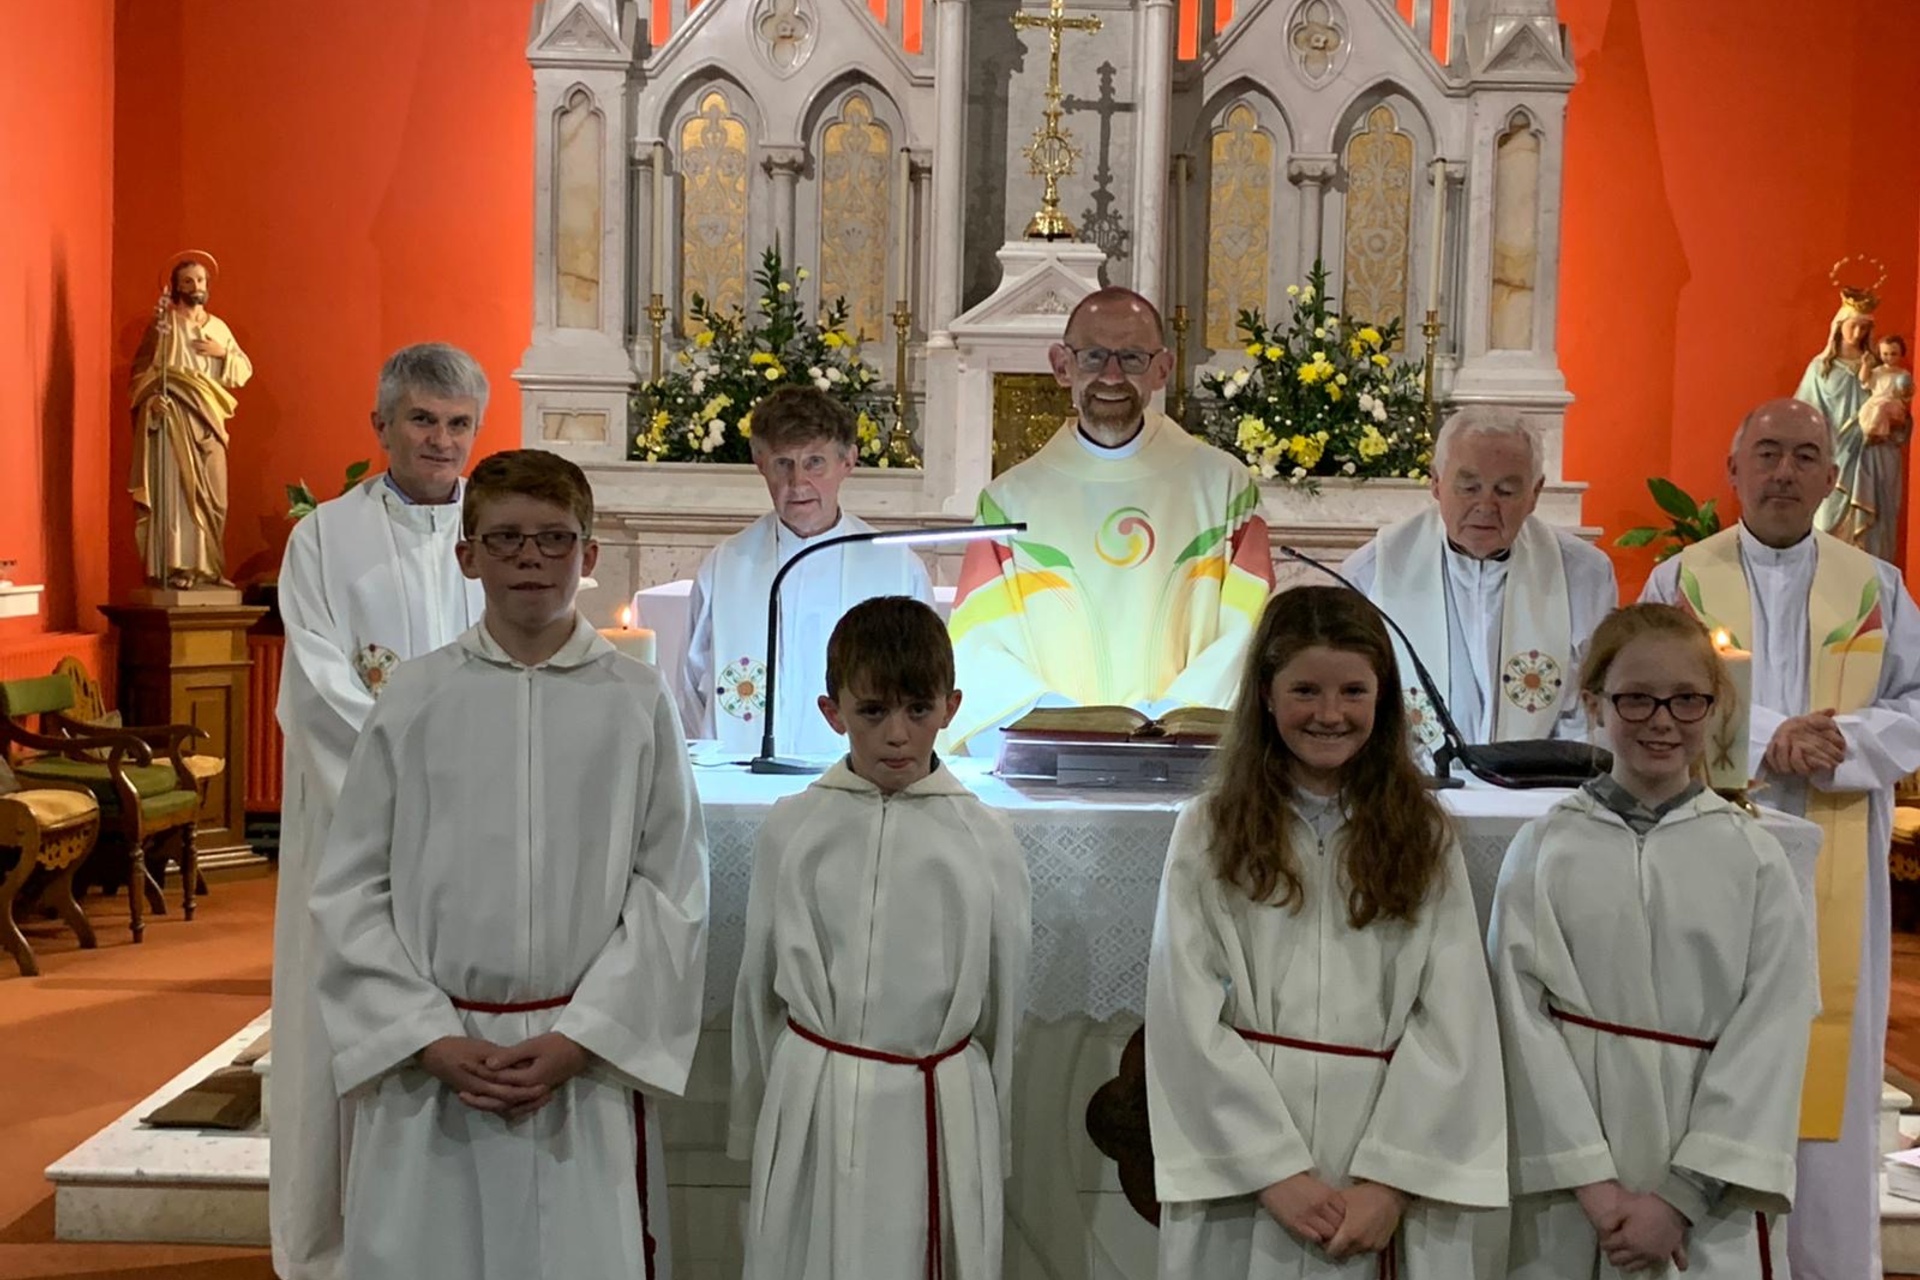 A special evening to honour the canonisation of John Henry Newman